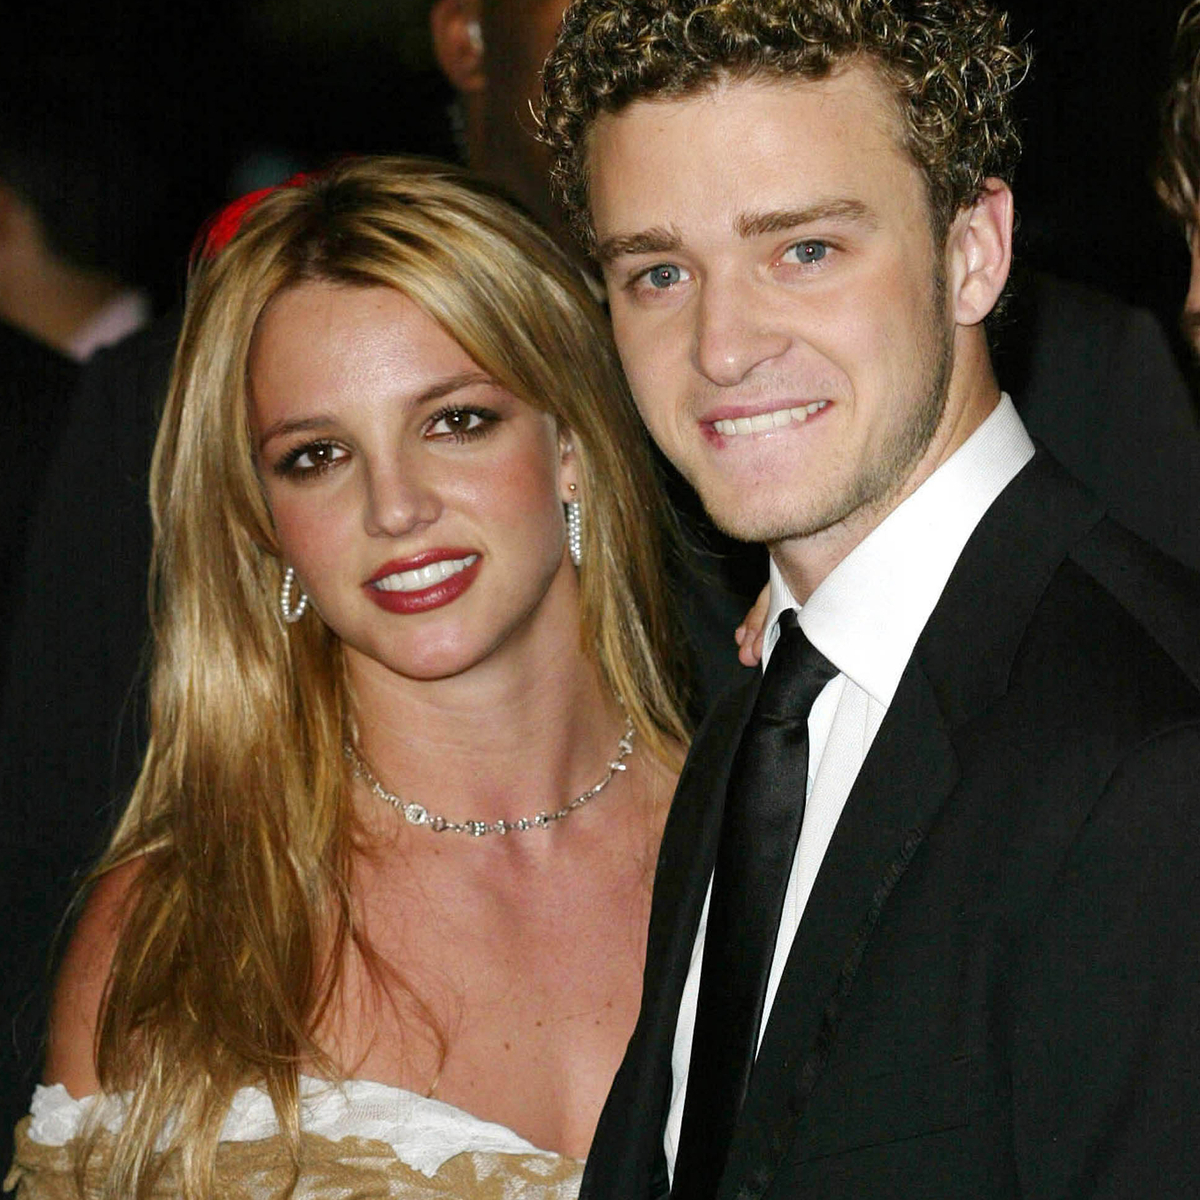 Justin Timberlake canceling gigs amid Britney Spears claims